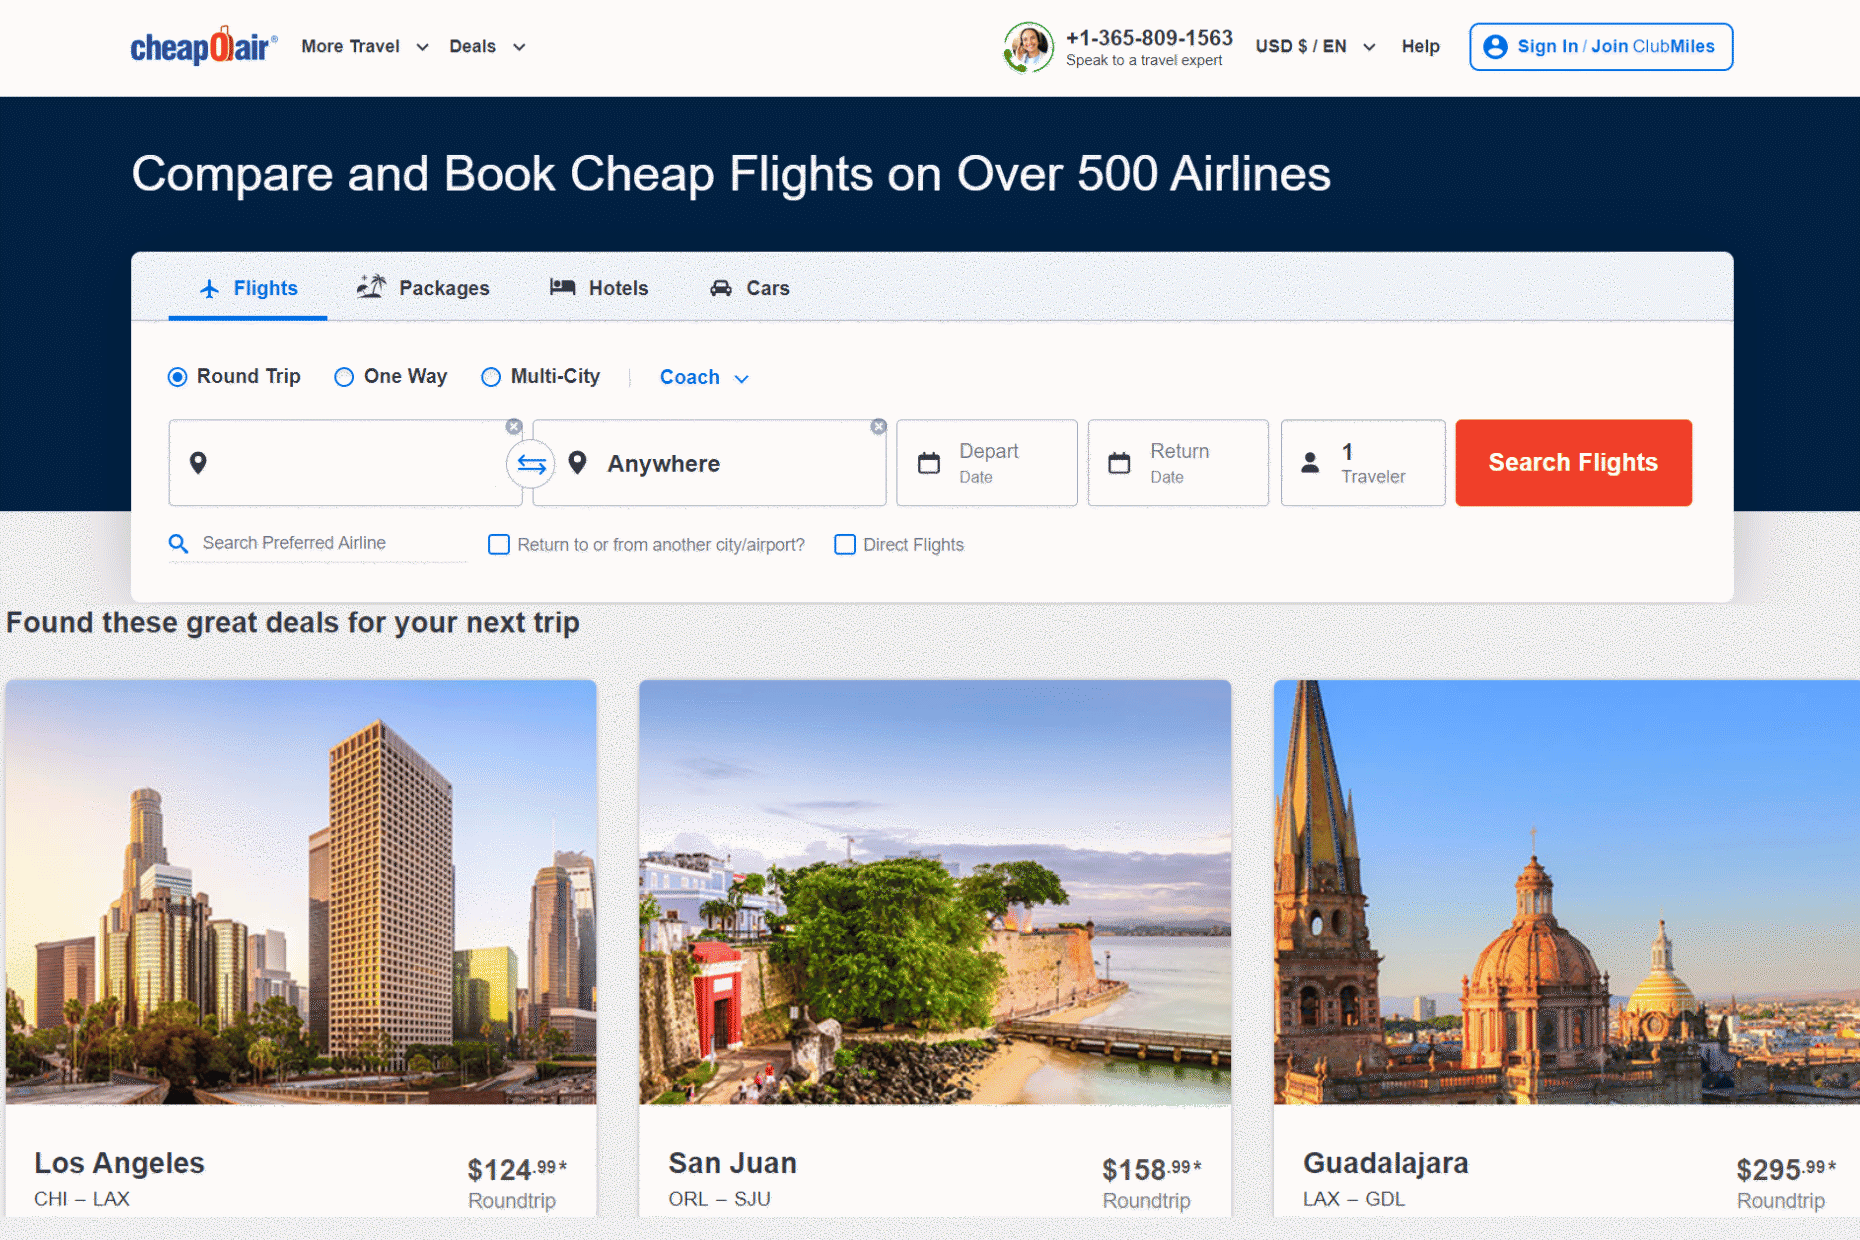 <p>Need to book a flight on short notice? <a href="https://www.cheapoair.ca/booknow/flights/discount-airfares?fpaffiliate=coaca-en-google-d-brand&fpsub=Brand-1-CheapOair&utm_campaign=Brand-1-Search&utm_term=cheapoair&utm_source=%7Bgoogle%7D&utm_medium=%7Bcpc%7D&device=c&fpprice=&utm_campaignID=20418609337&utm_adgroupID=153493345122&refid=&gad_source=1&gclid=CjwKCAjwoPOwBhAeEiwAJuXRh-vU0PMMmzf7yIkCBQHN_oEMXXavxdUZK5tT0Nu9SEzbj78pKaY9UBoCWT4QAvD_BwE">CheapOair</a> is <a href="https://www.frommers.com/slideshows/848046-the-10-best-and-worst-airfare-search-sites-for-2024">the reigning king</a> of last-minute airfares. It has handy date-picker calendars so you can easily see which day is cheapest to fly. It also includes options to book flights into nearby airports which may be cheaper. You can also call the company’s customer service line for phone-only deals. Perhaps ironically, reviews suggest it might not be the best place to go for advance bookings. </p>